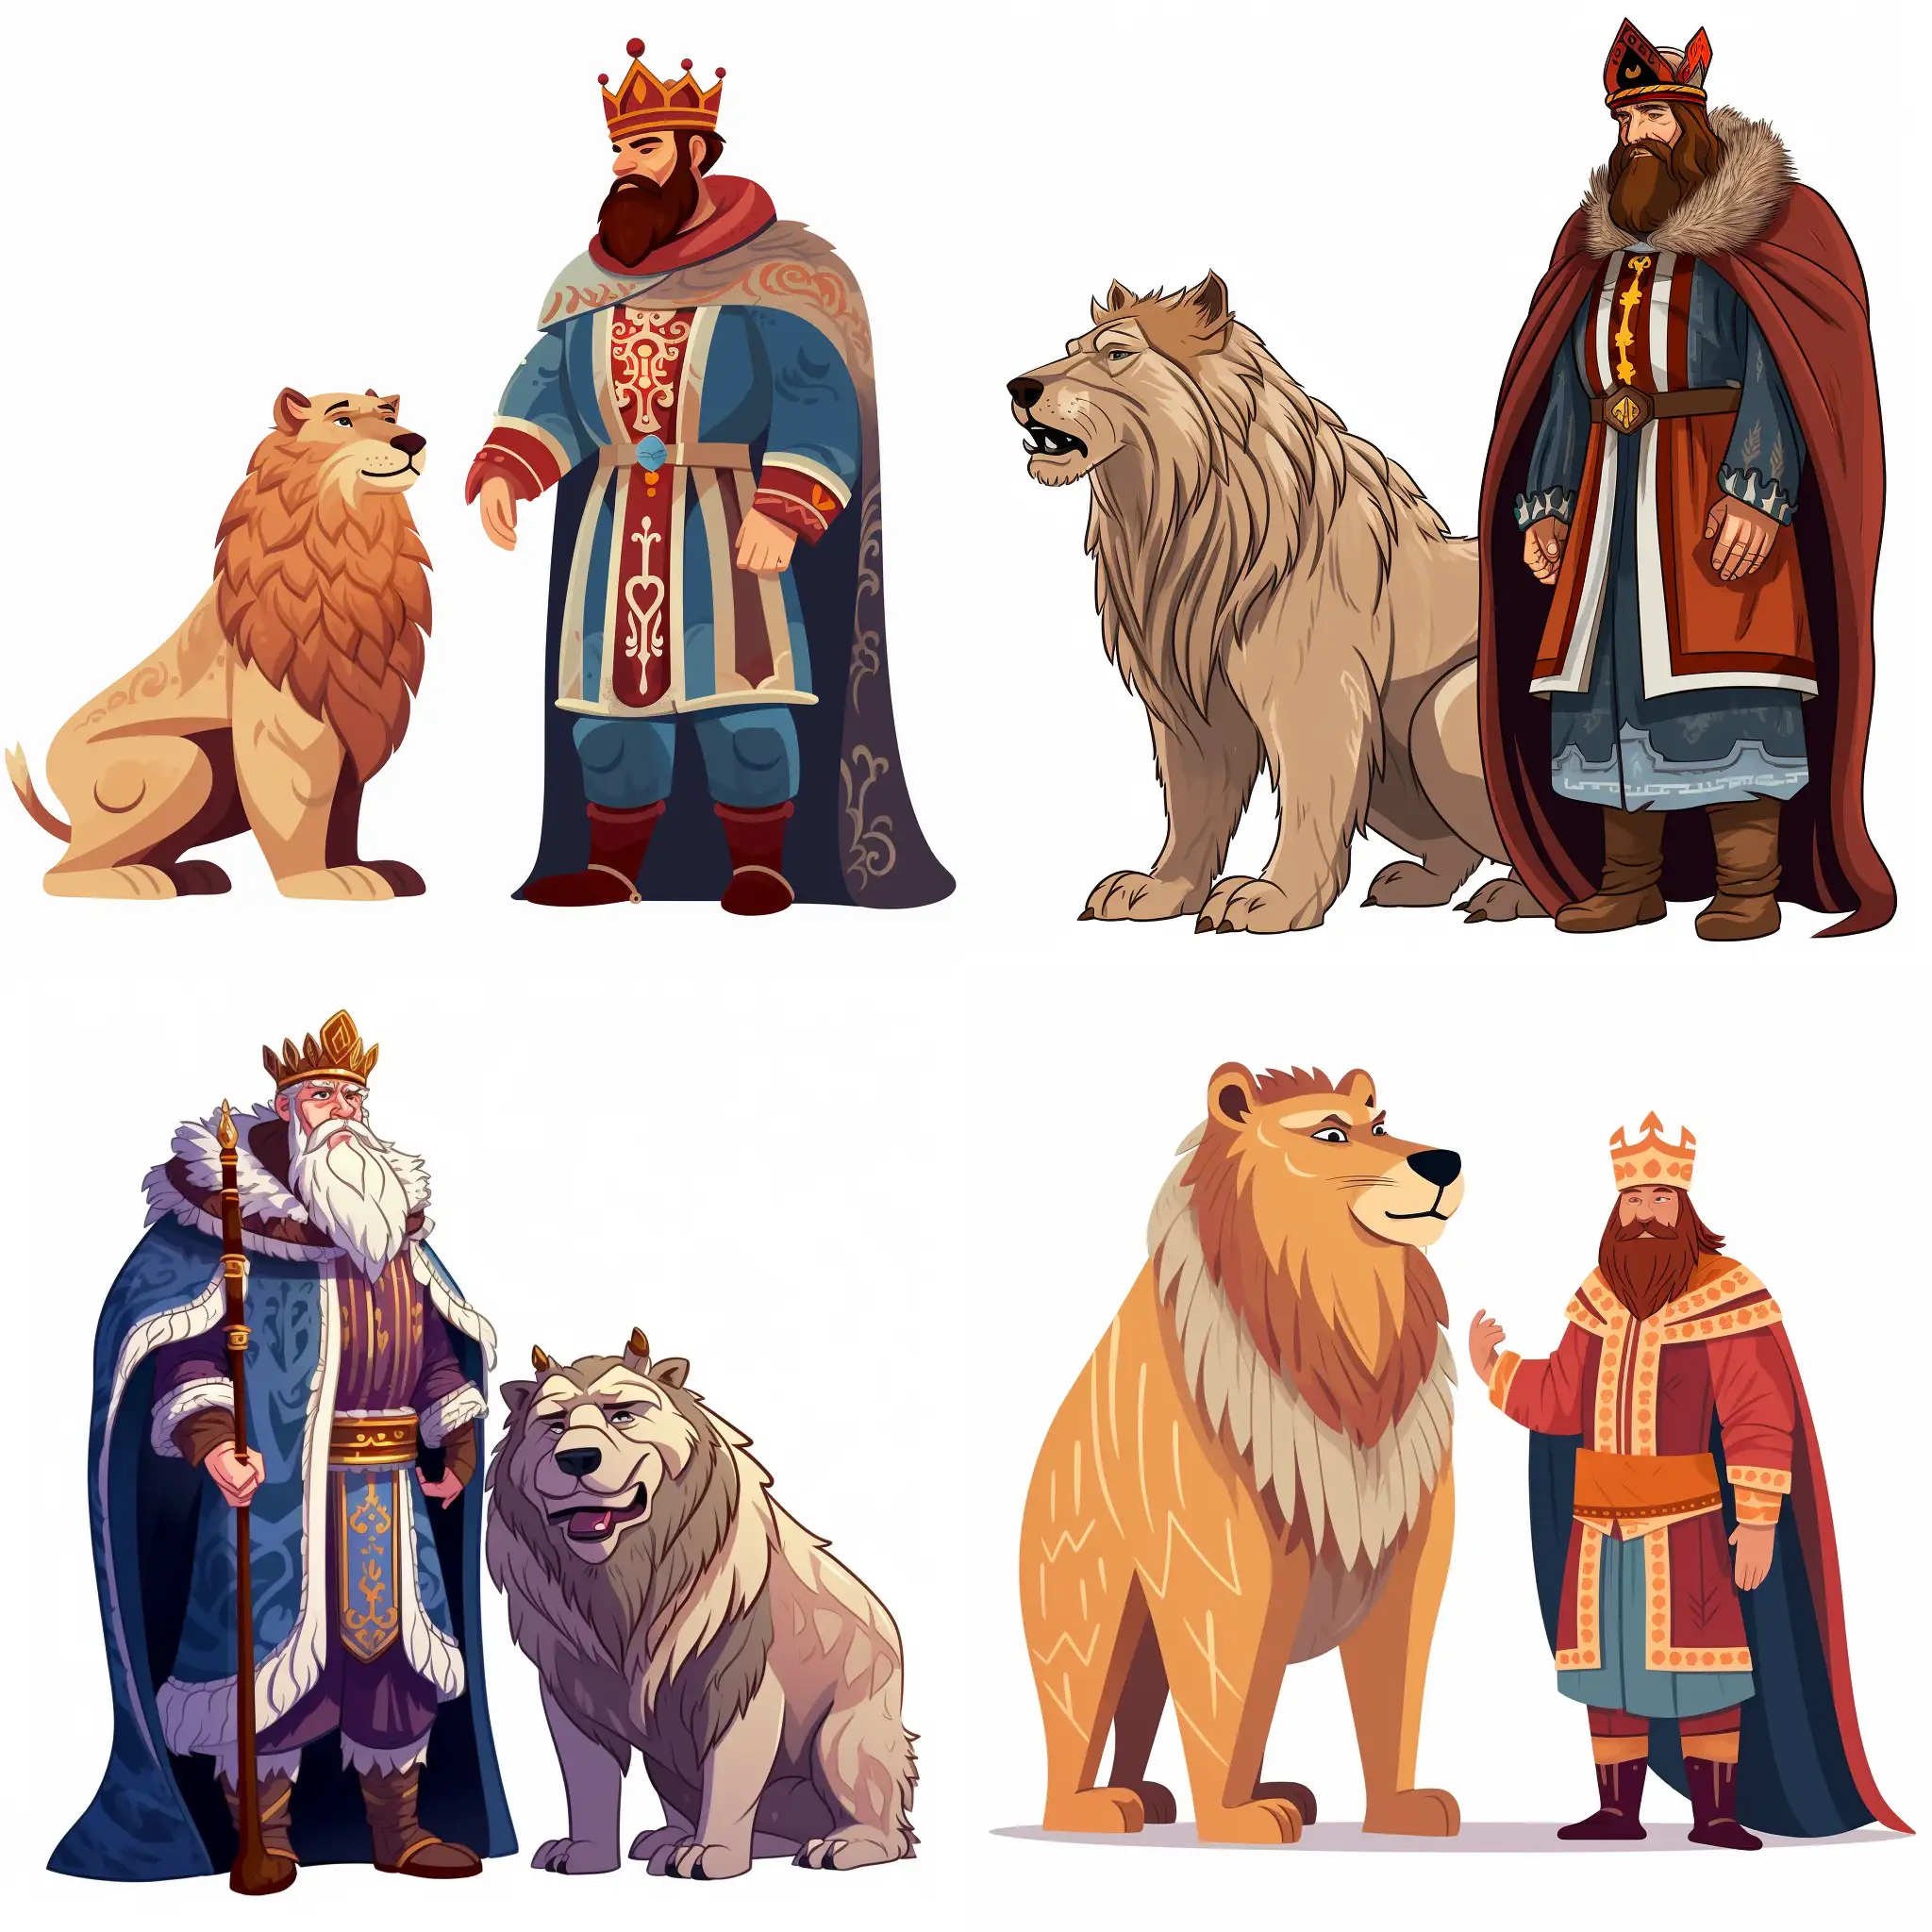 Russian-King-Ivan-Stands-Proudly-Beside-Majestic-Wolf-Cartoon-Style-Illustration